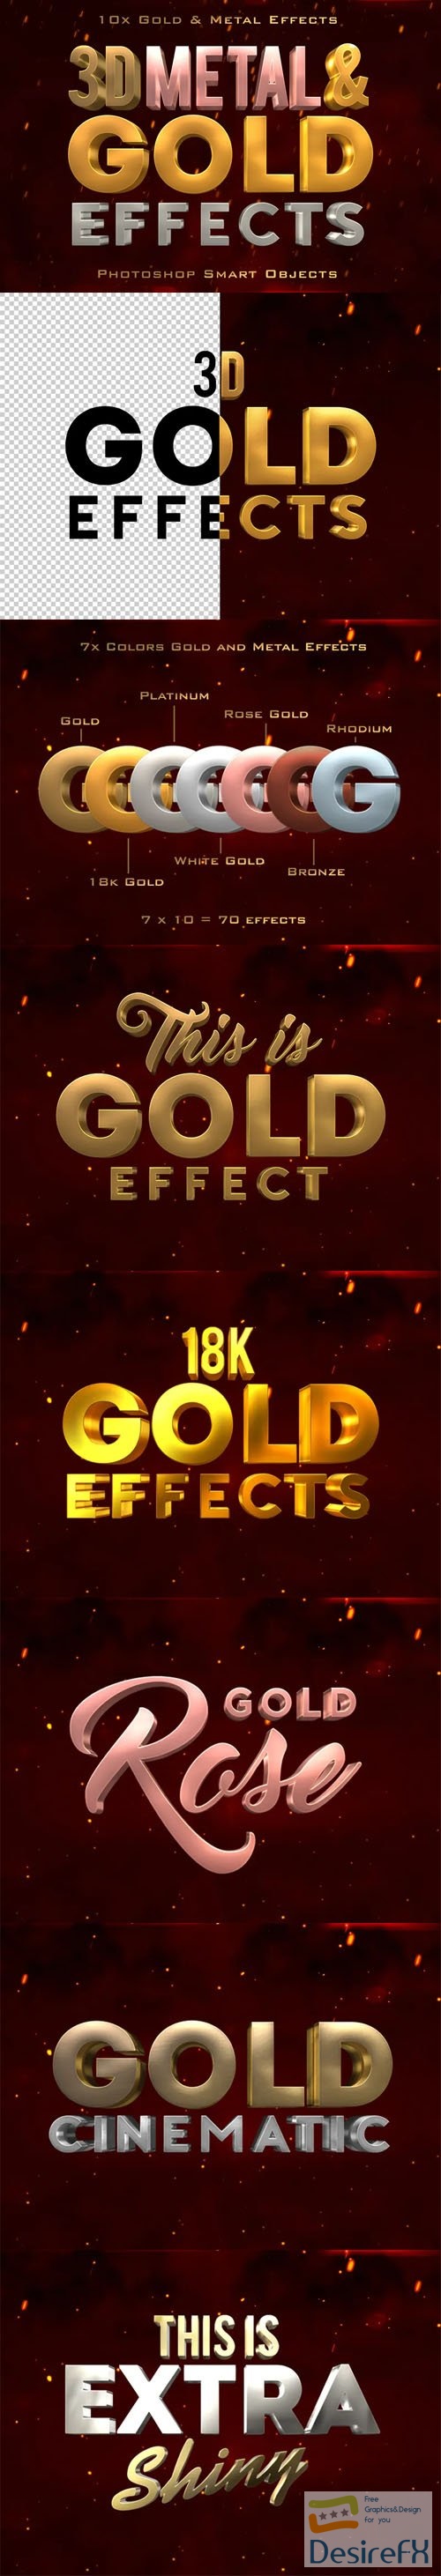 10x 3D Metal &amp; Gold Effects for Photoshop